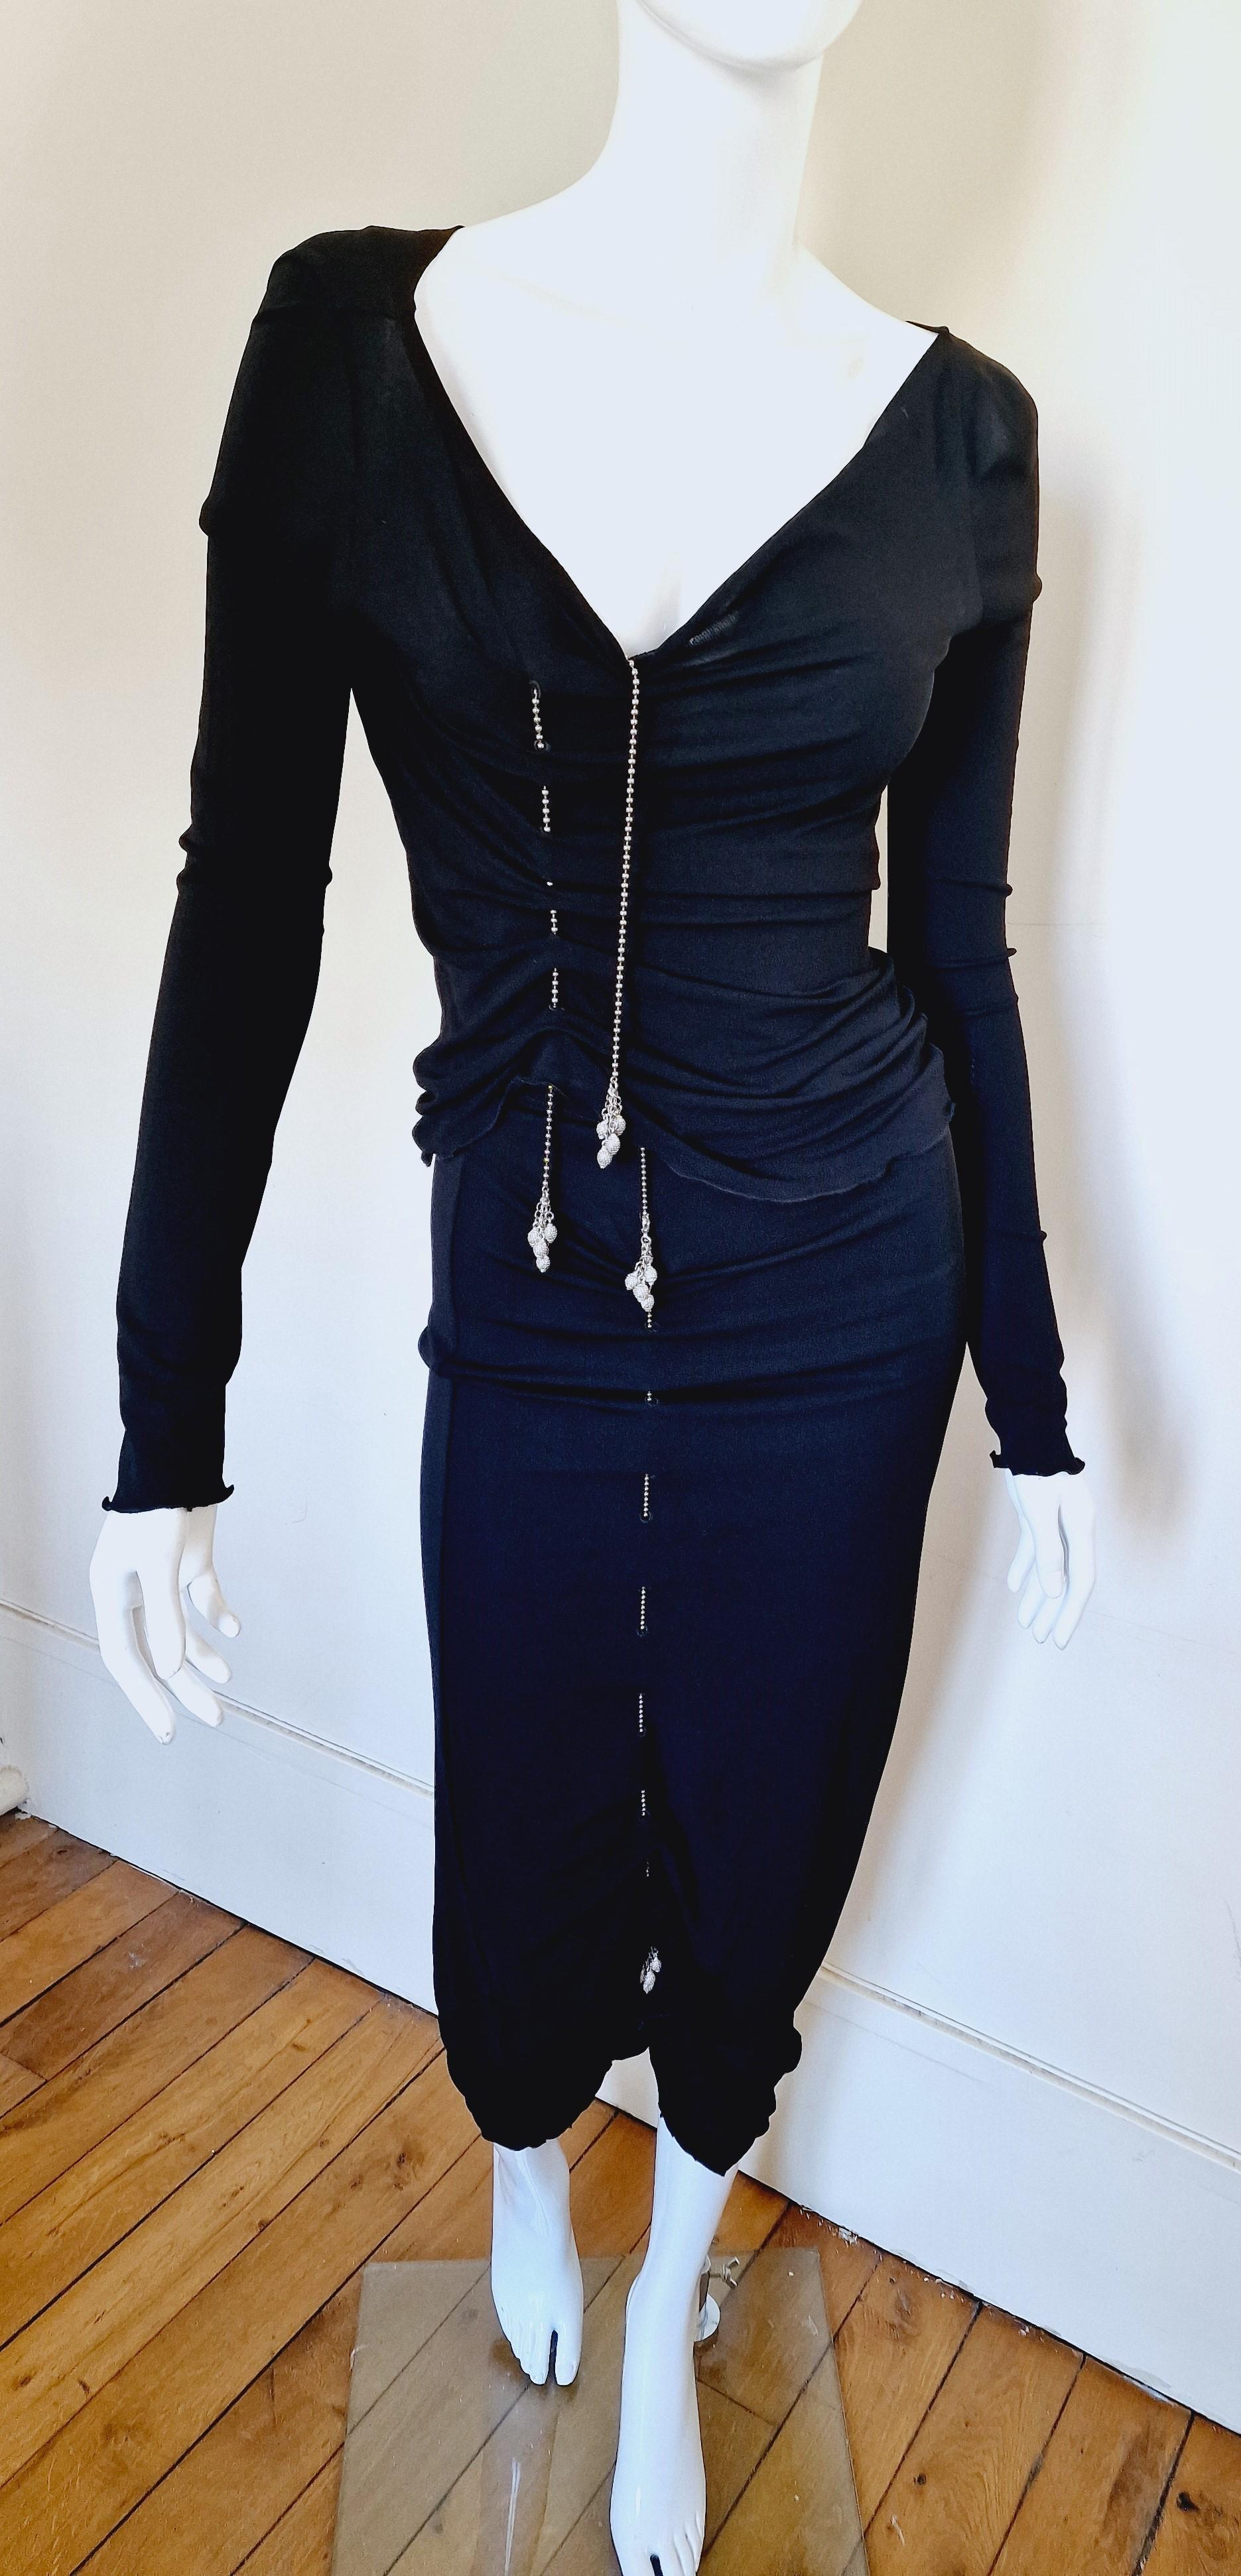 Chain dress by Jean Paul Gaultier!
2-piece dress! 
You can adjust the length by the chains. 

The NBA star Dwyane Wade`s wife, Gabrielle Union worn the same one-piece version dress on her husband`s 40th birthday. 

VERY GOOD condition!

SIZE
Large.